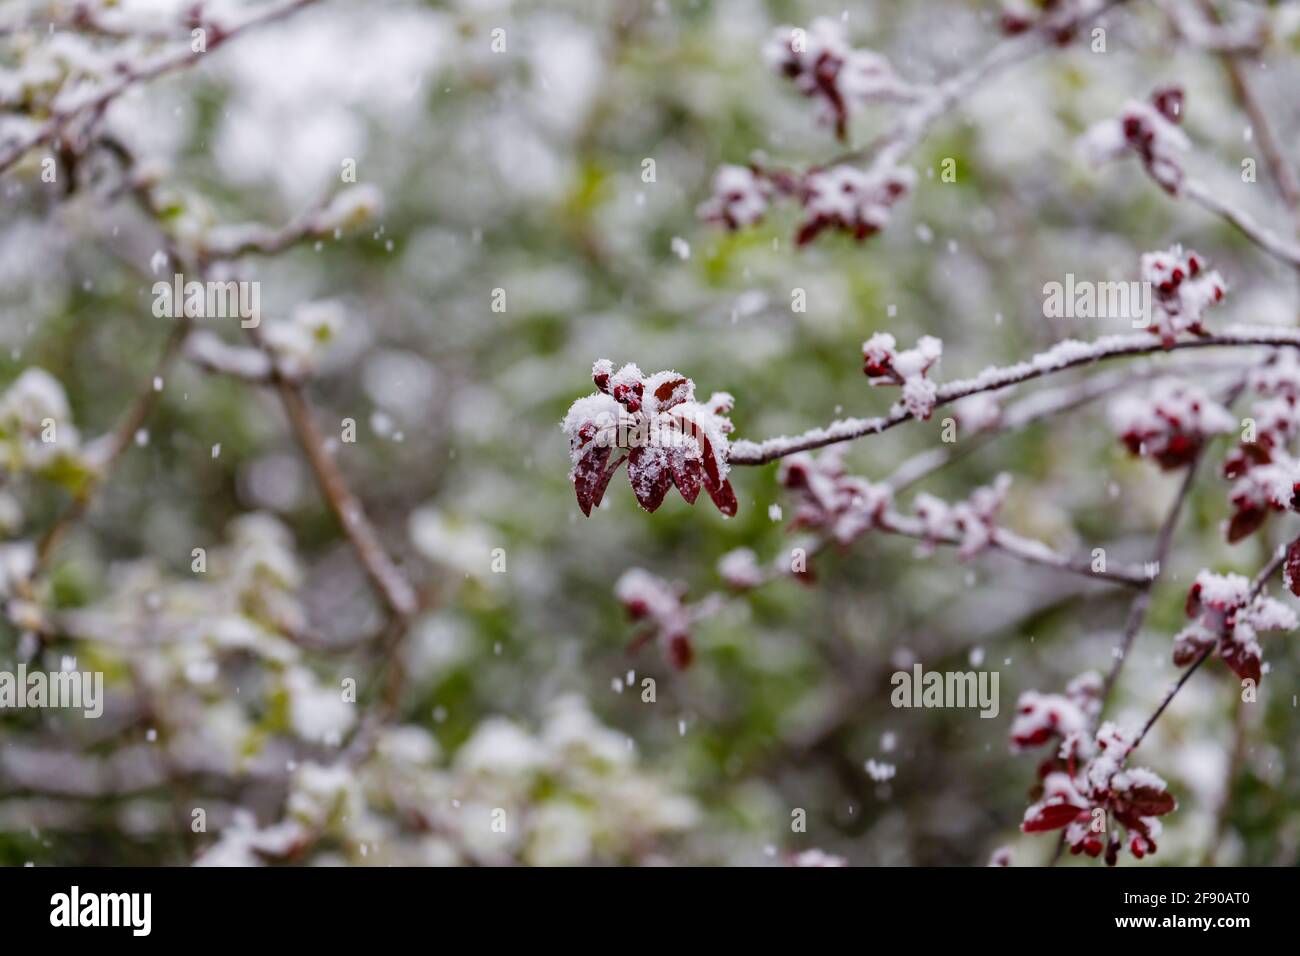 Blossom of a dark red crab apple (Malus) tree covered in snow in a garden in Surrey, south-east England after unseasonal late mid-April snow Stock Photo